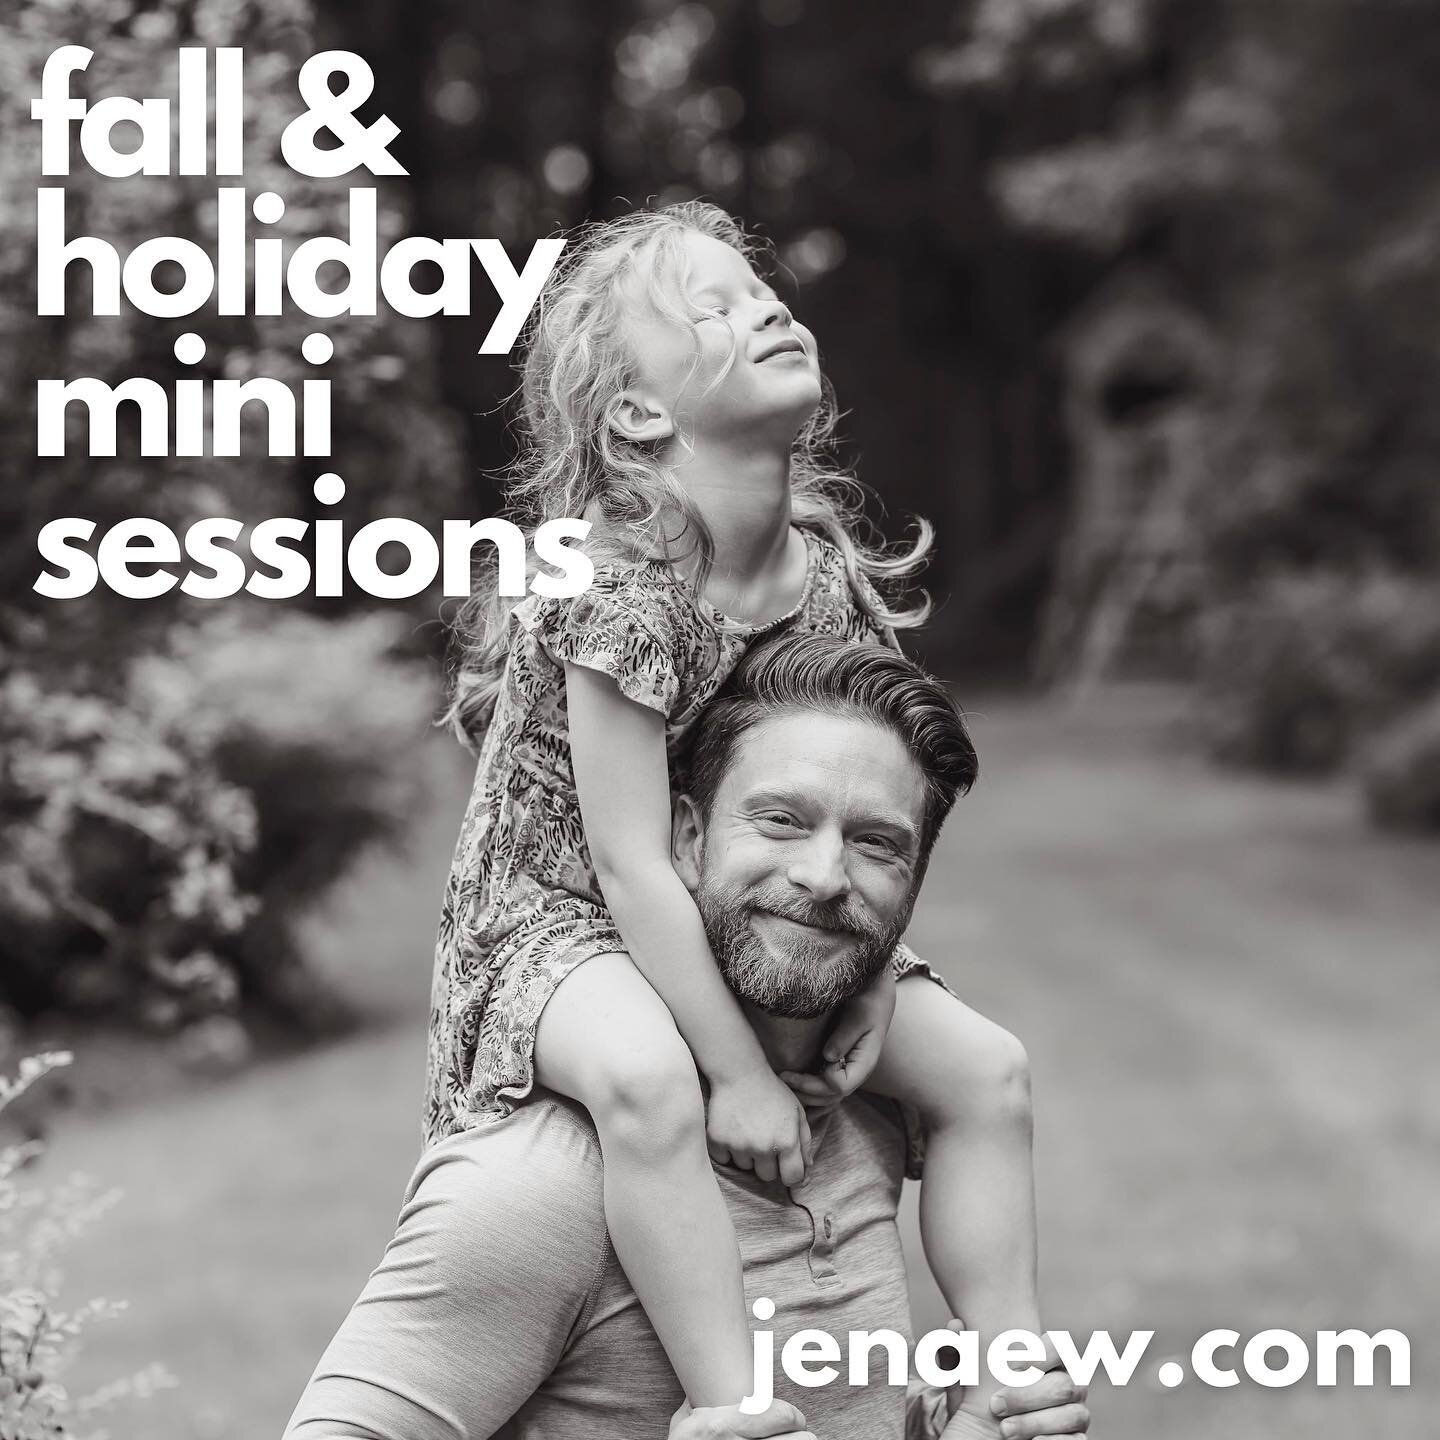 Fall and Holiday sessions are here and I&rsquo;m excited to see everyone! I&rsquo;m booking the East Coast (CT/NY) all season with focused days in Westport, CT September 9 and October 14 and also in Kansas City October 7-8. Book your spot today! Jena